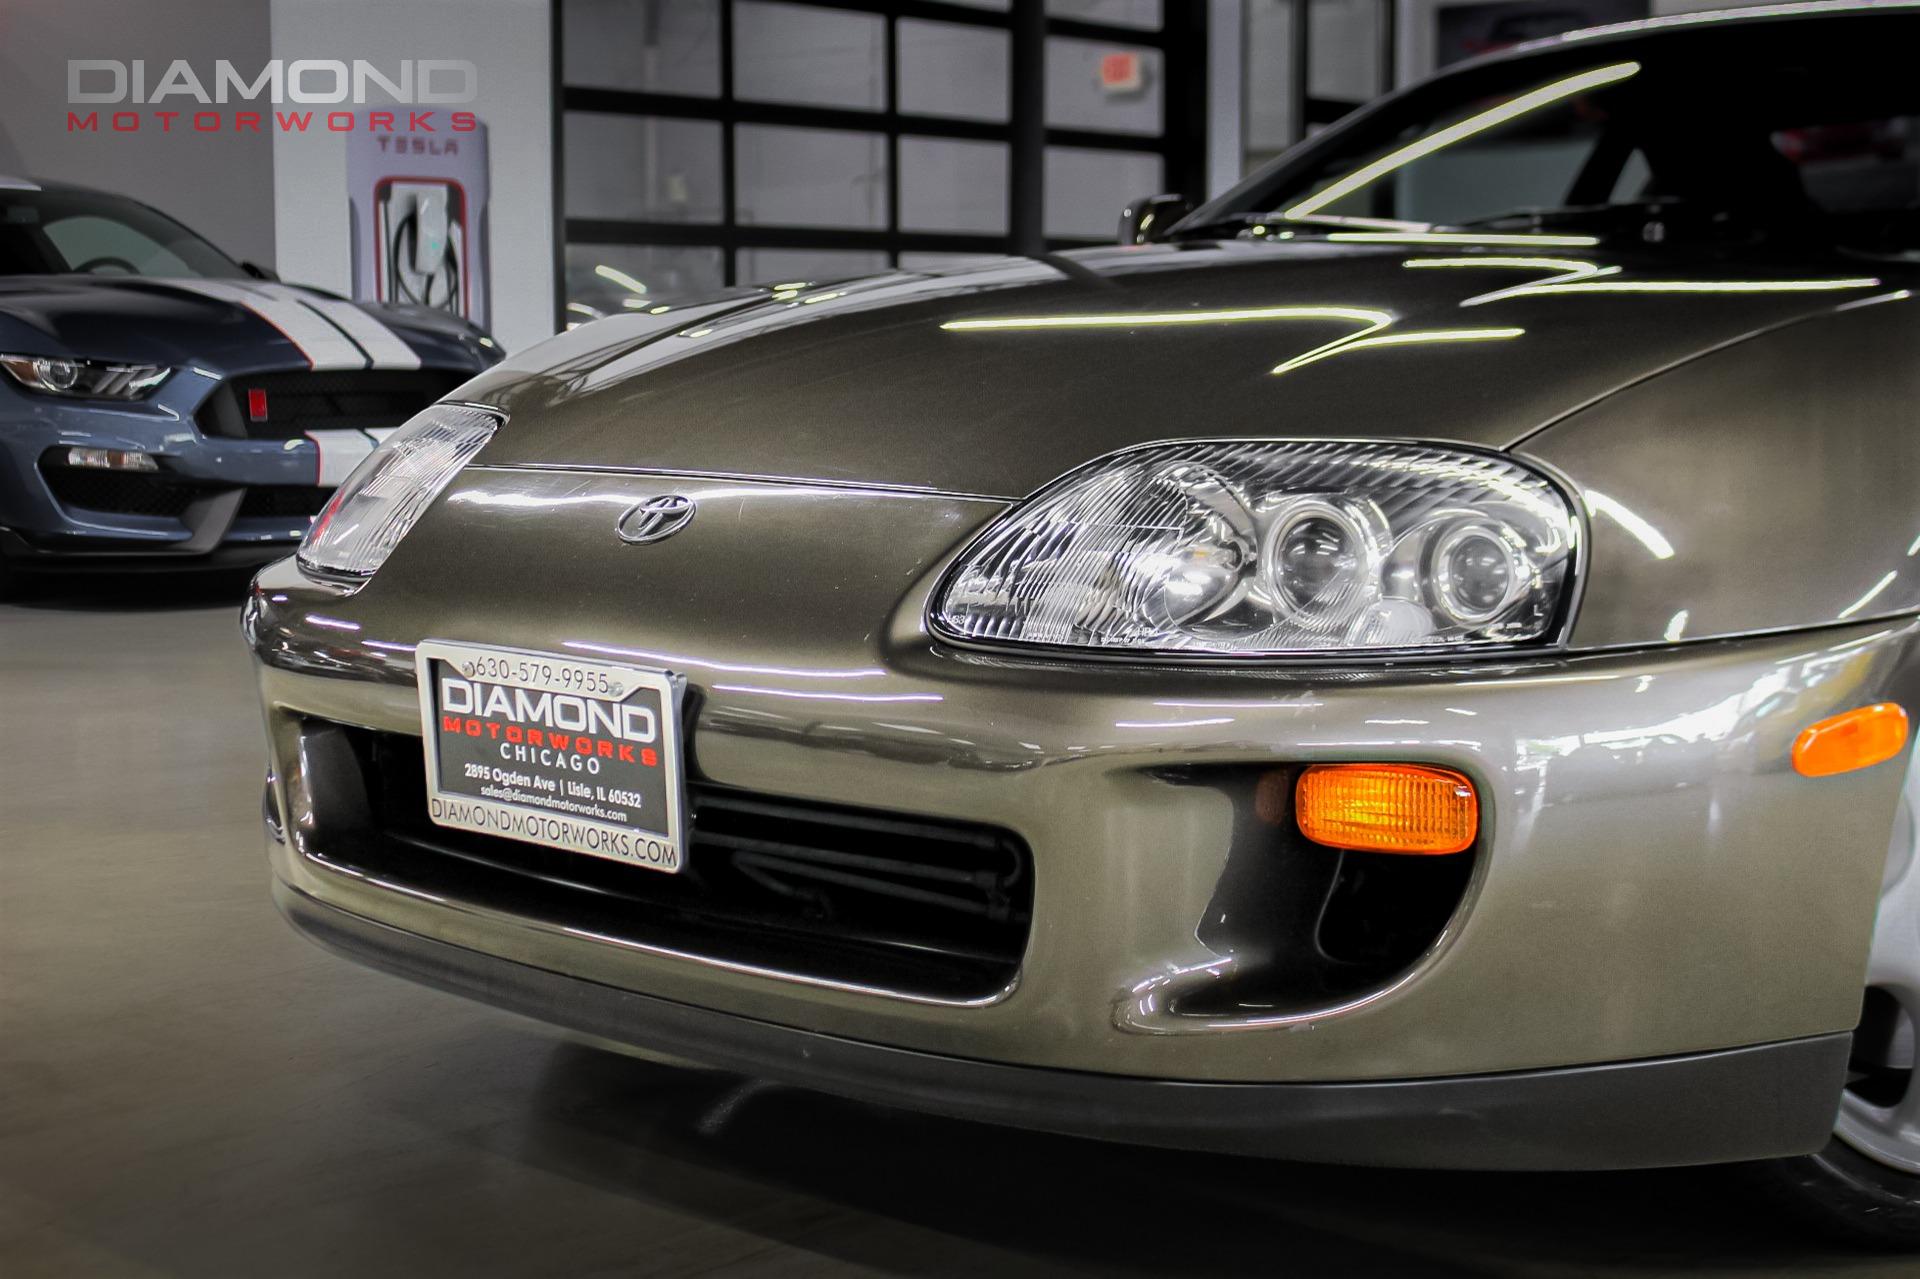 Used 1993 Toyota Supra Mk4 6-Spd! 1,000+ WHP! Real St. Performance